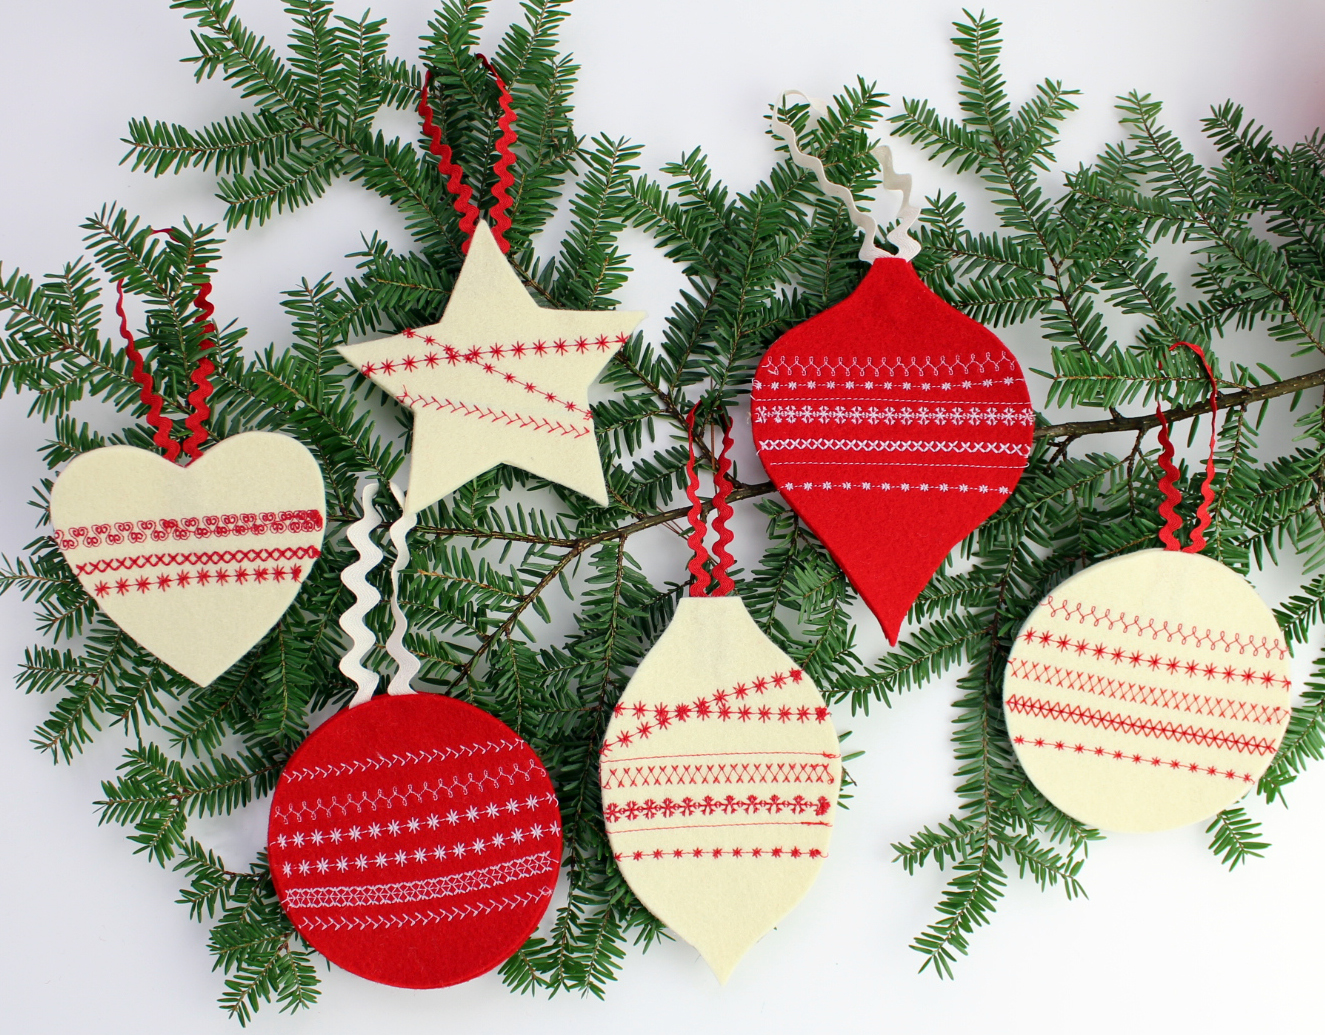 Finished felt ornaments hanging on tree branch.